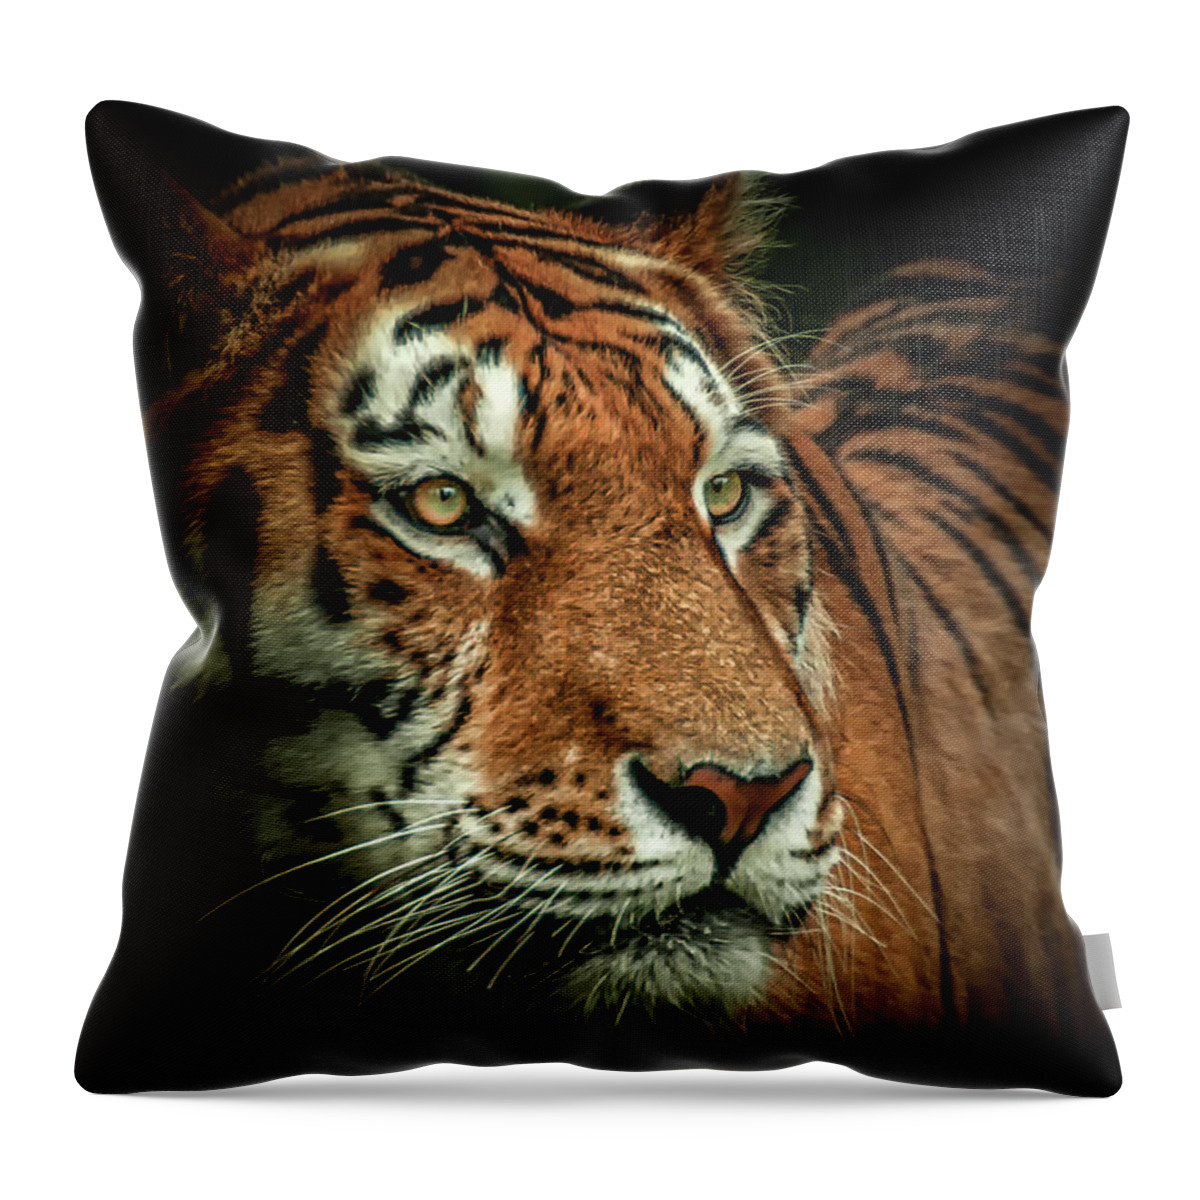 Tiger Throw Pillow featuring the photograph Tiger by Chris Boulton